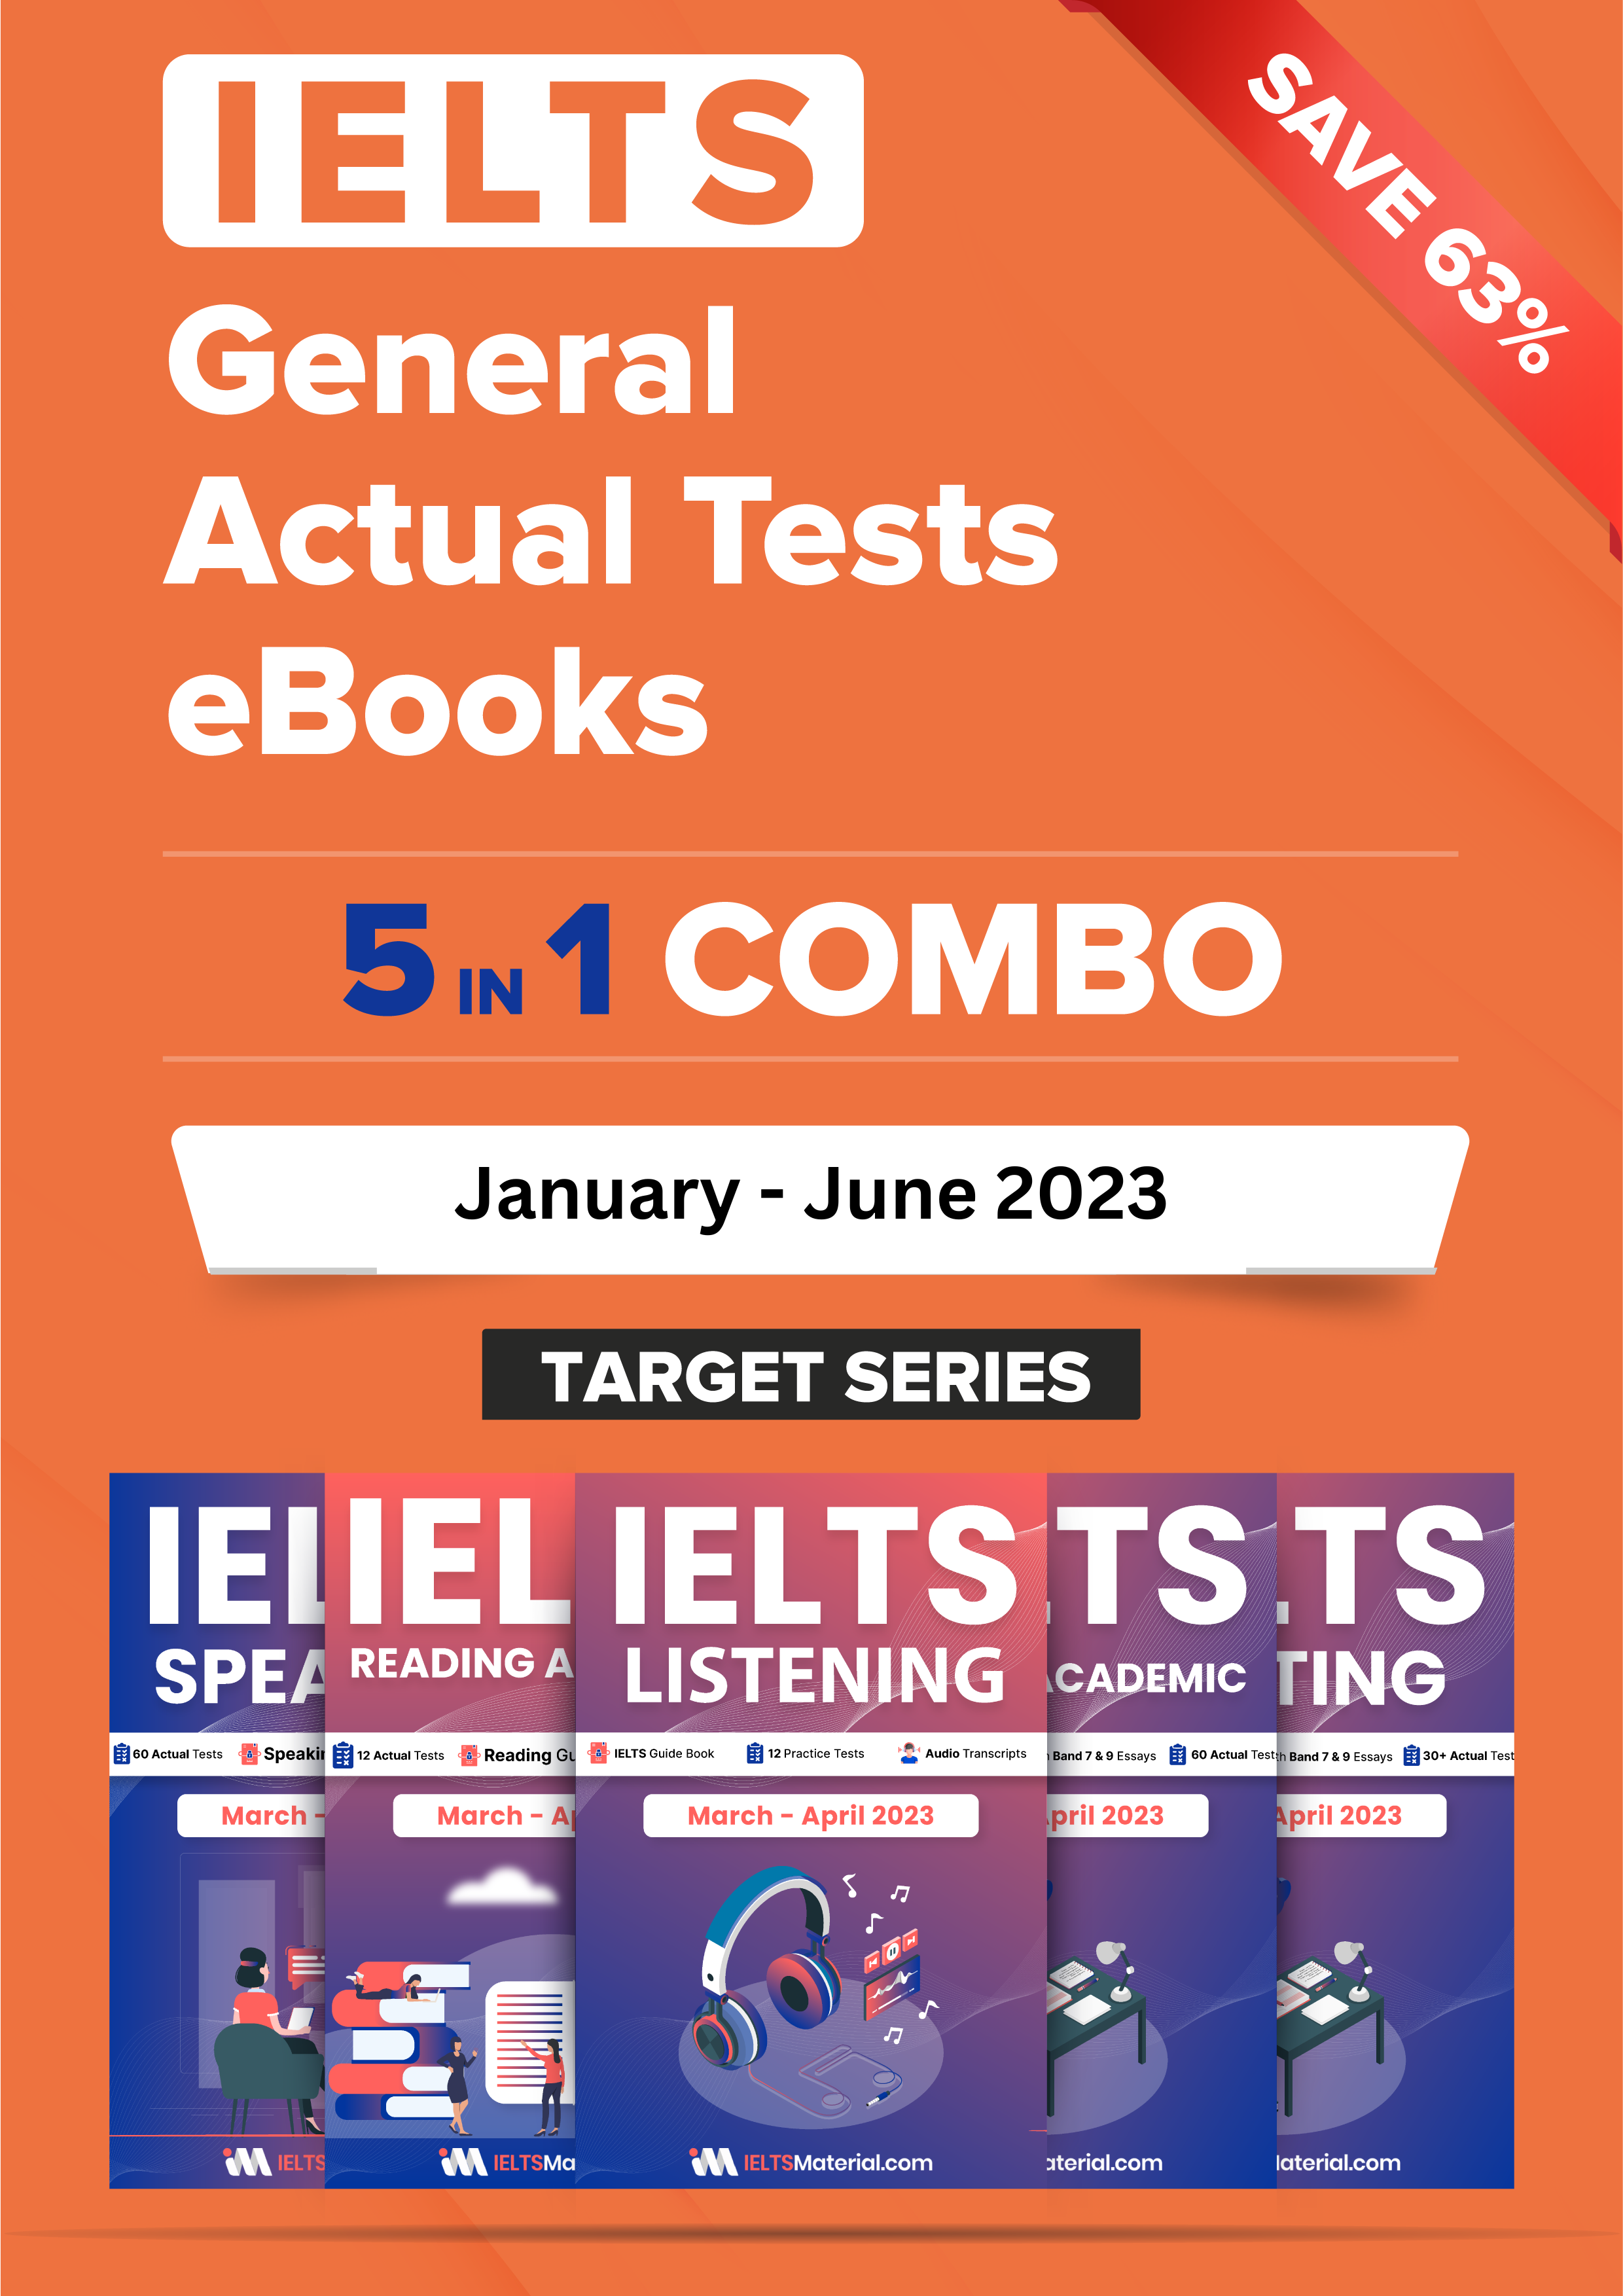 IELTS Reading General: Learner’s Kit: Actual Tests eBook Combo (January – June 2023)